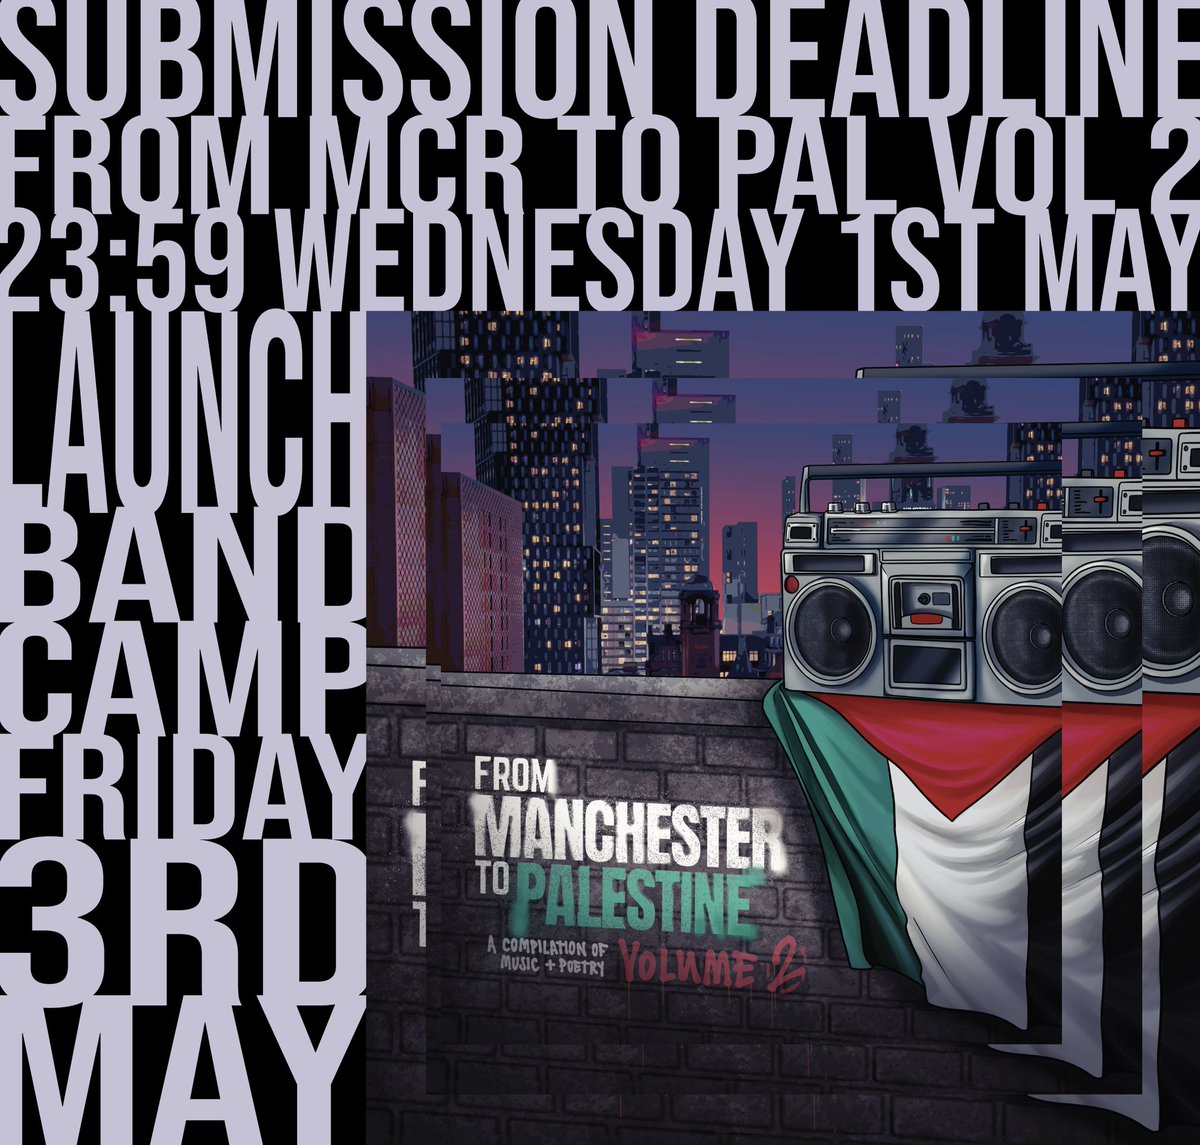 Already a phenomenal response, Manchester ❤️ Entering the final 24 hrs soon then launch on #BandcampFriday 3rd May Submit: mcr4pal.uk